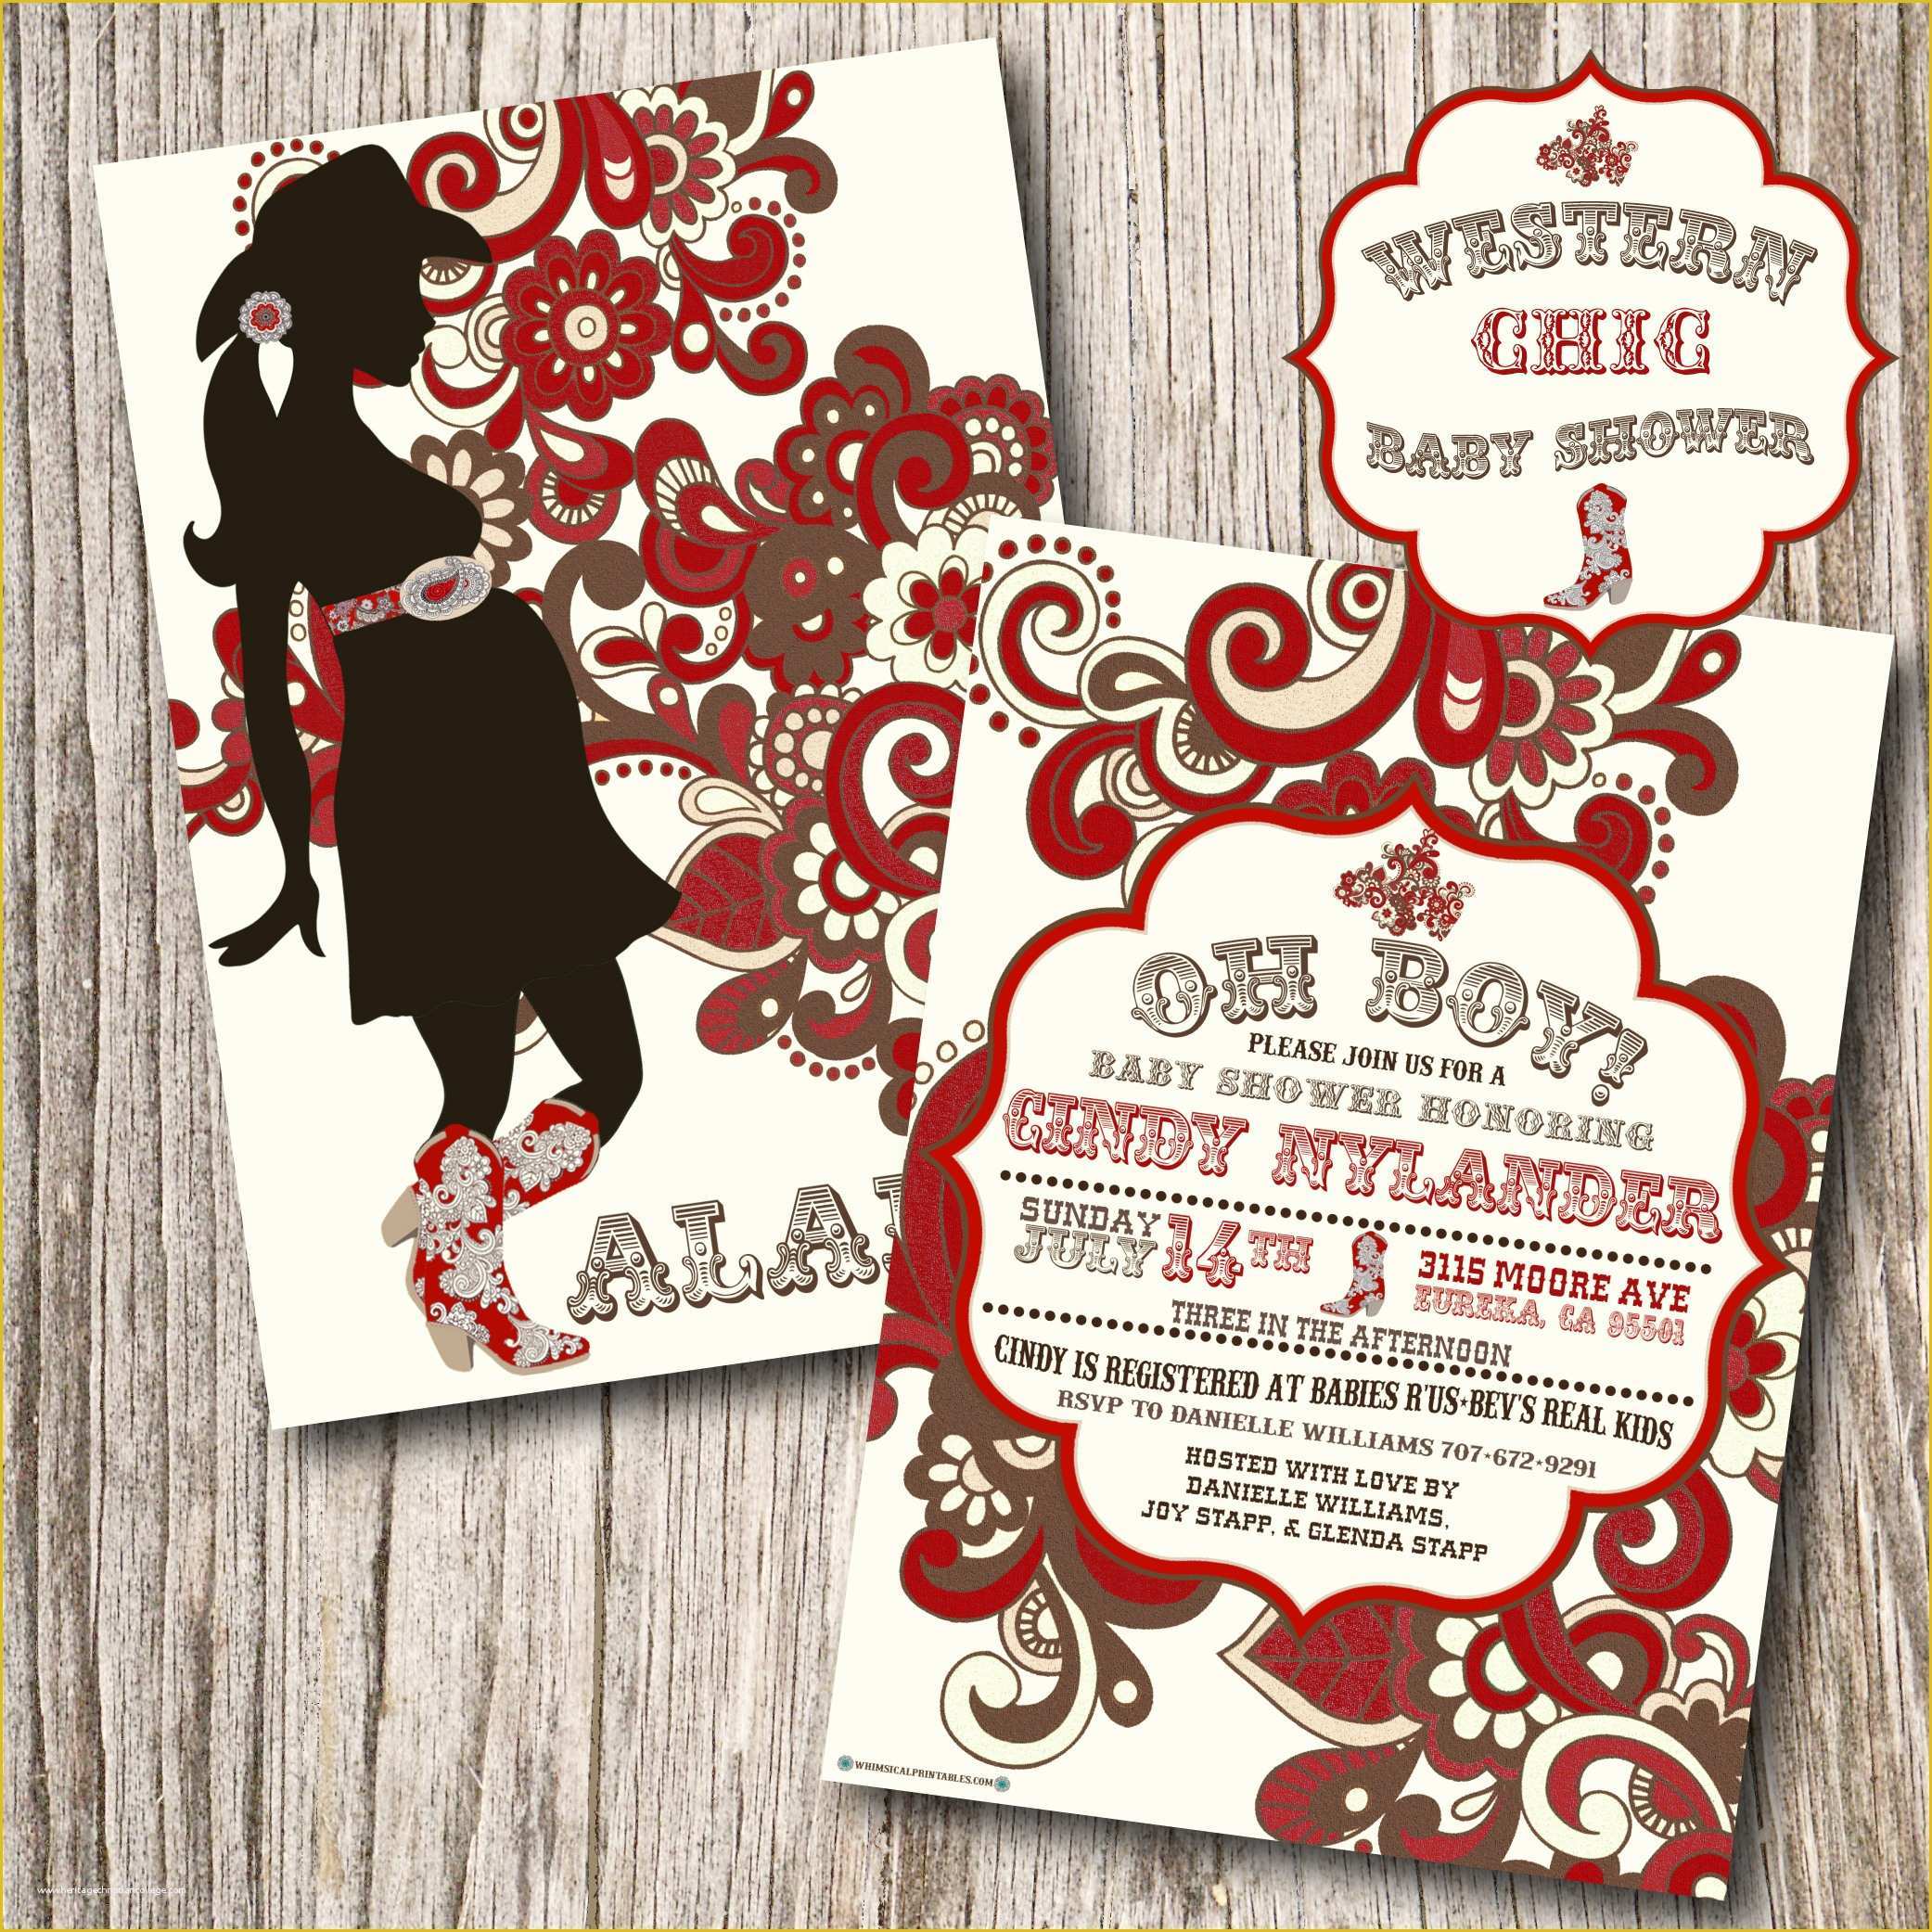 Free Western Baby Shower Invitation Templates Of Natural Western Baby Shower theme Ideas and Cowboy themed